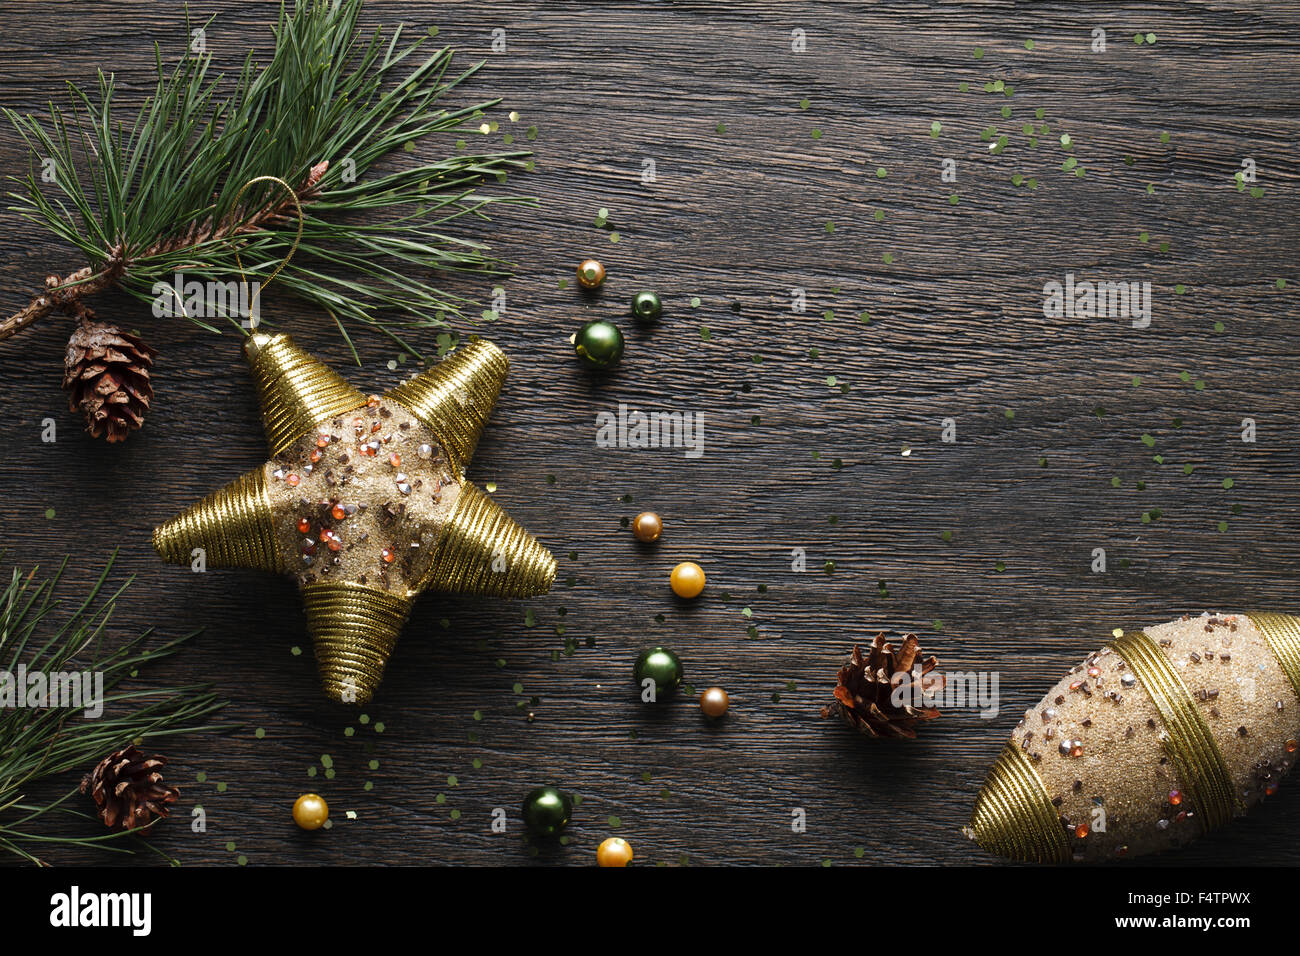 Dark Christmas background with golden decorations Stock Photo